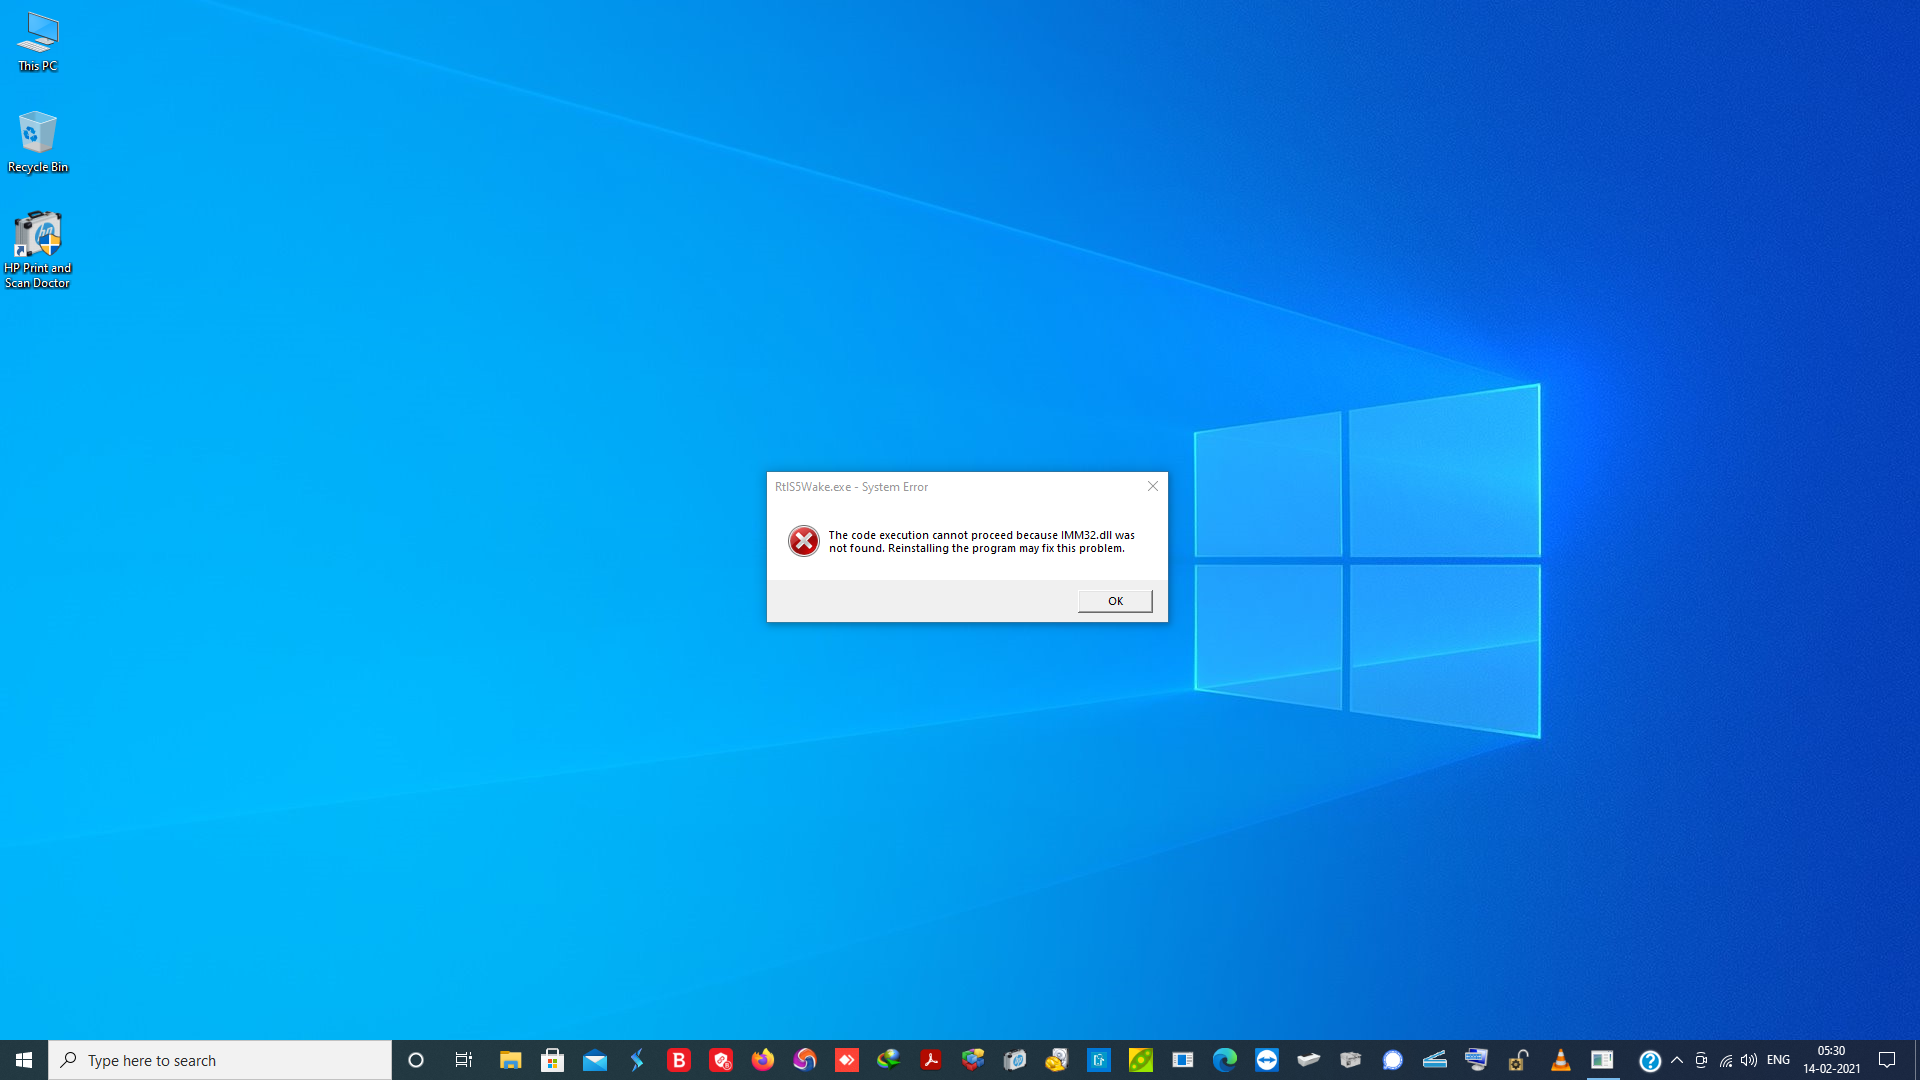 File corrupted virus. Windows 10 Error. File corrupted! This program has been manipulated and maybe it's infected.